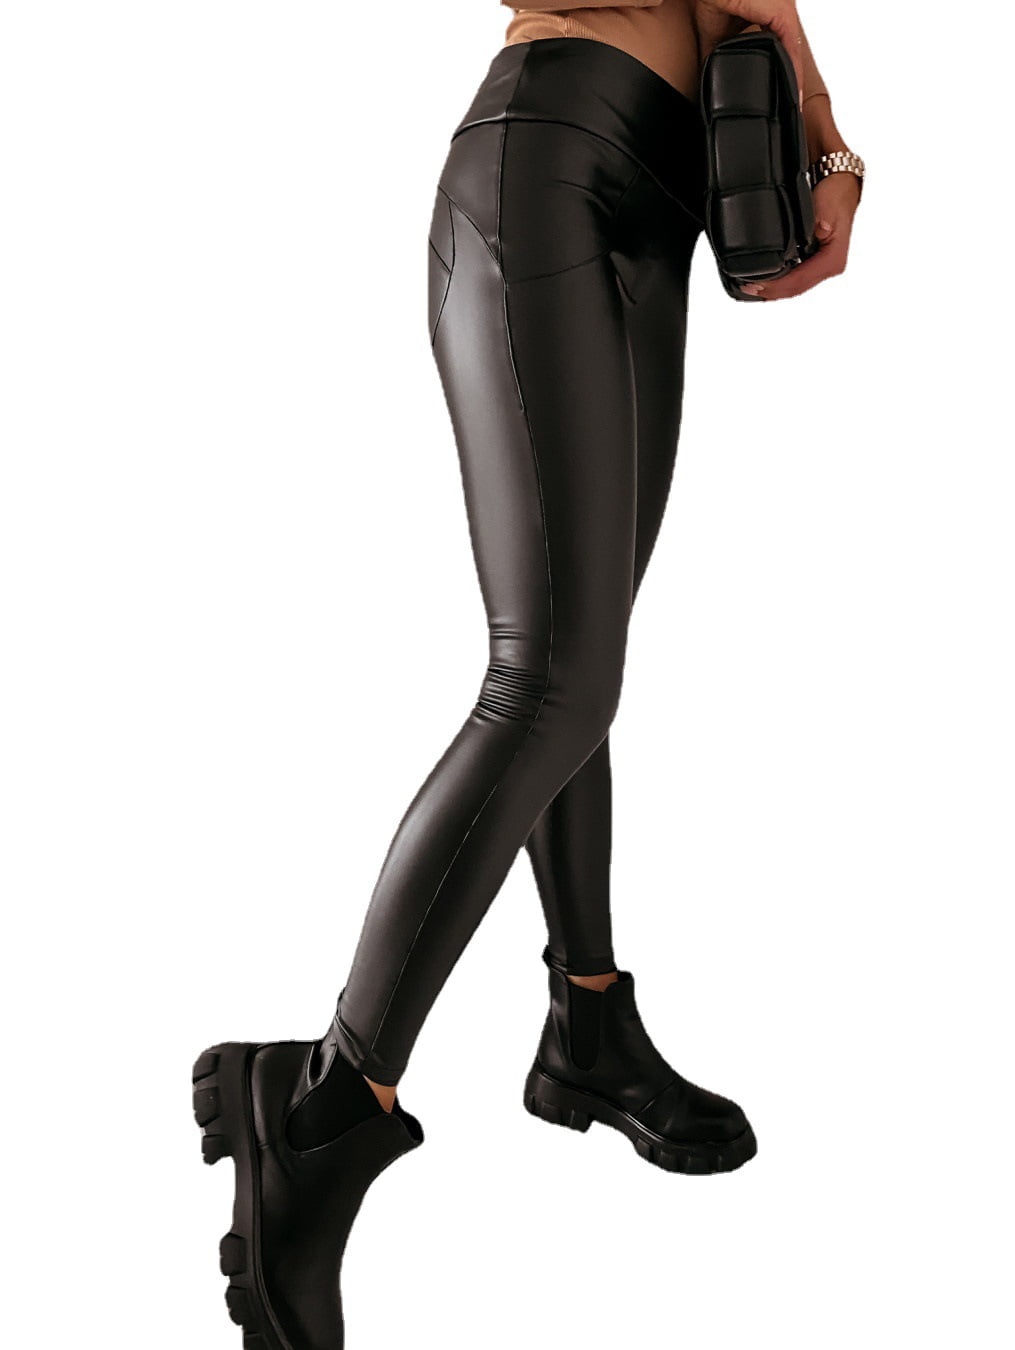 BESTSPR Autumn And Winter Slim High Waist With Pockets Pu Tight Leather  Pants Female 